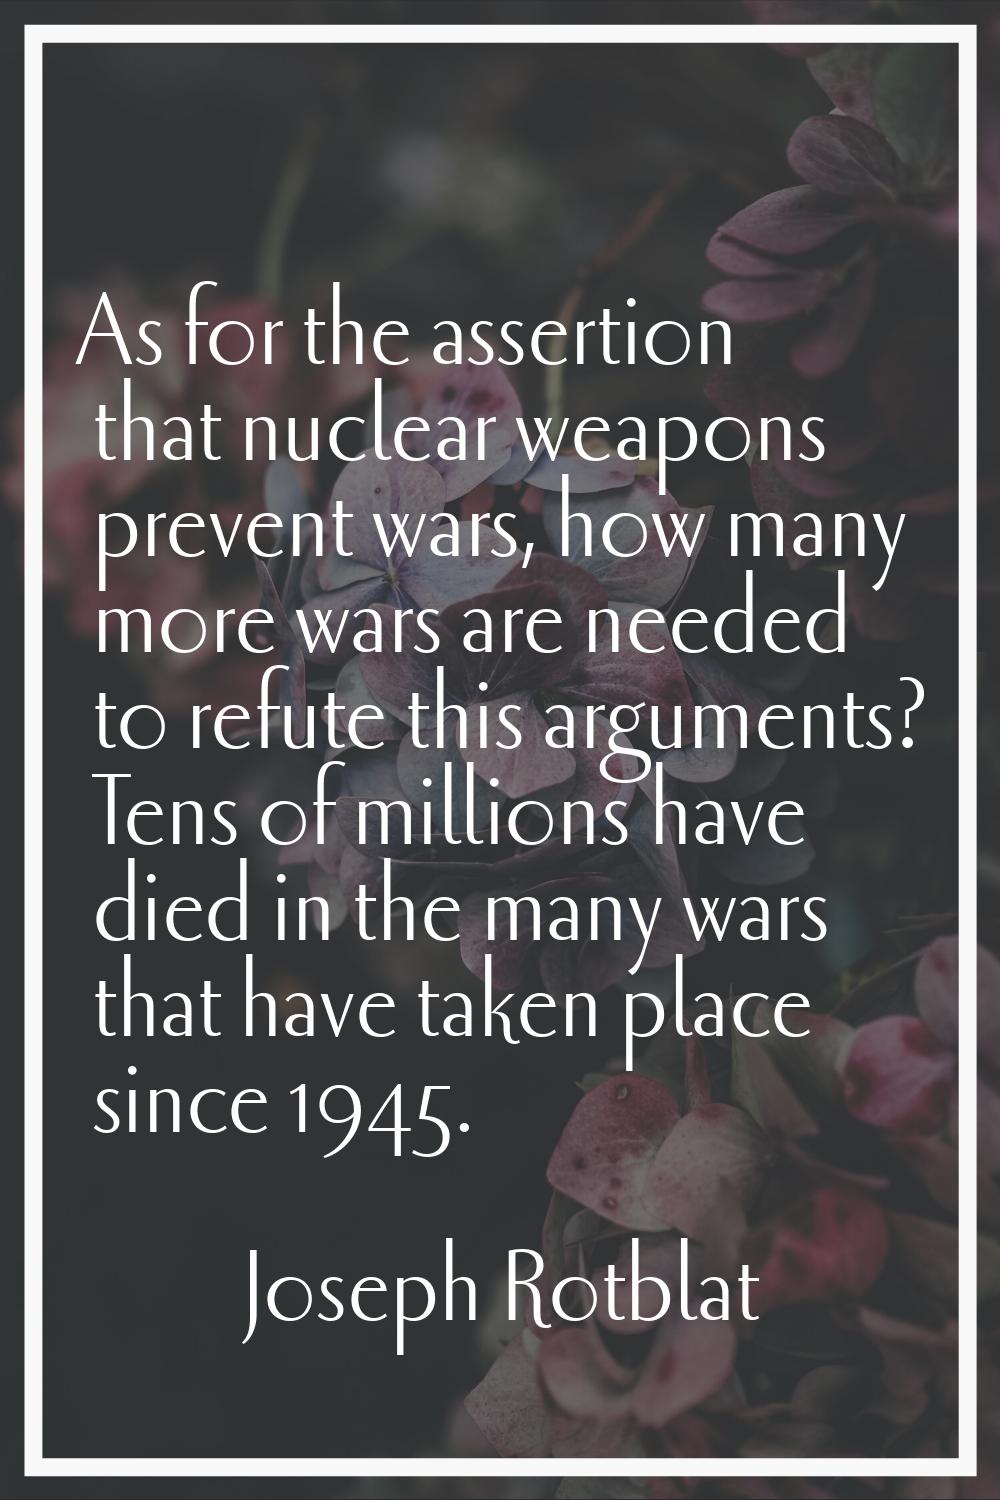 As for the assertion that nuclear weapons prevent wars, how many more wars are needed to refute thi